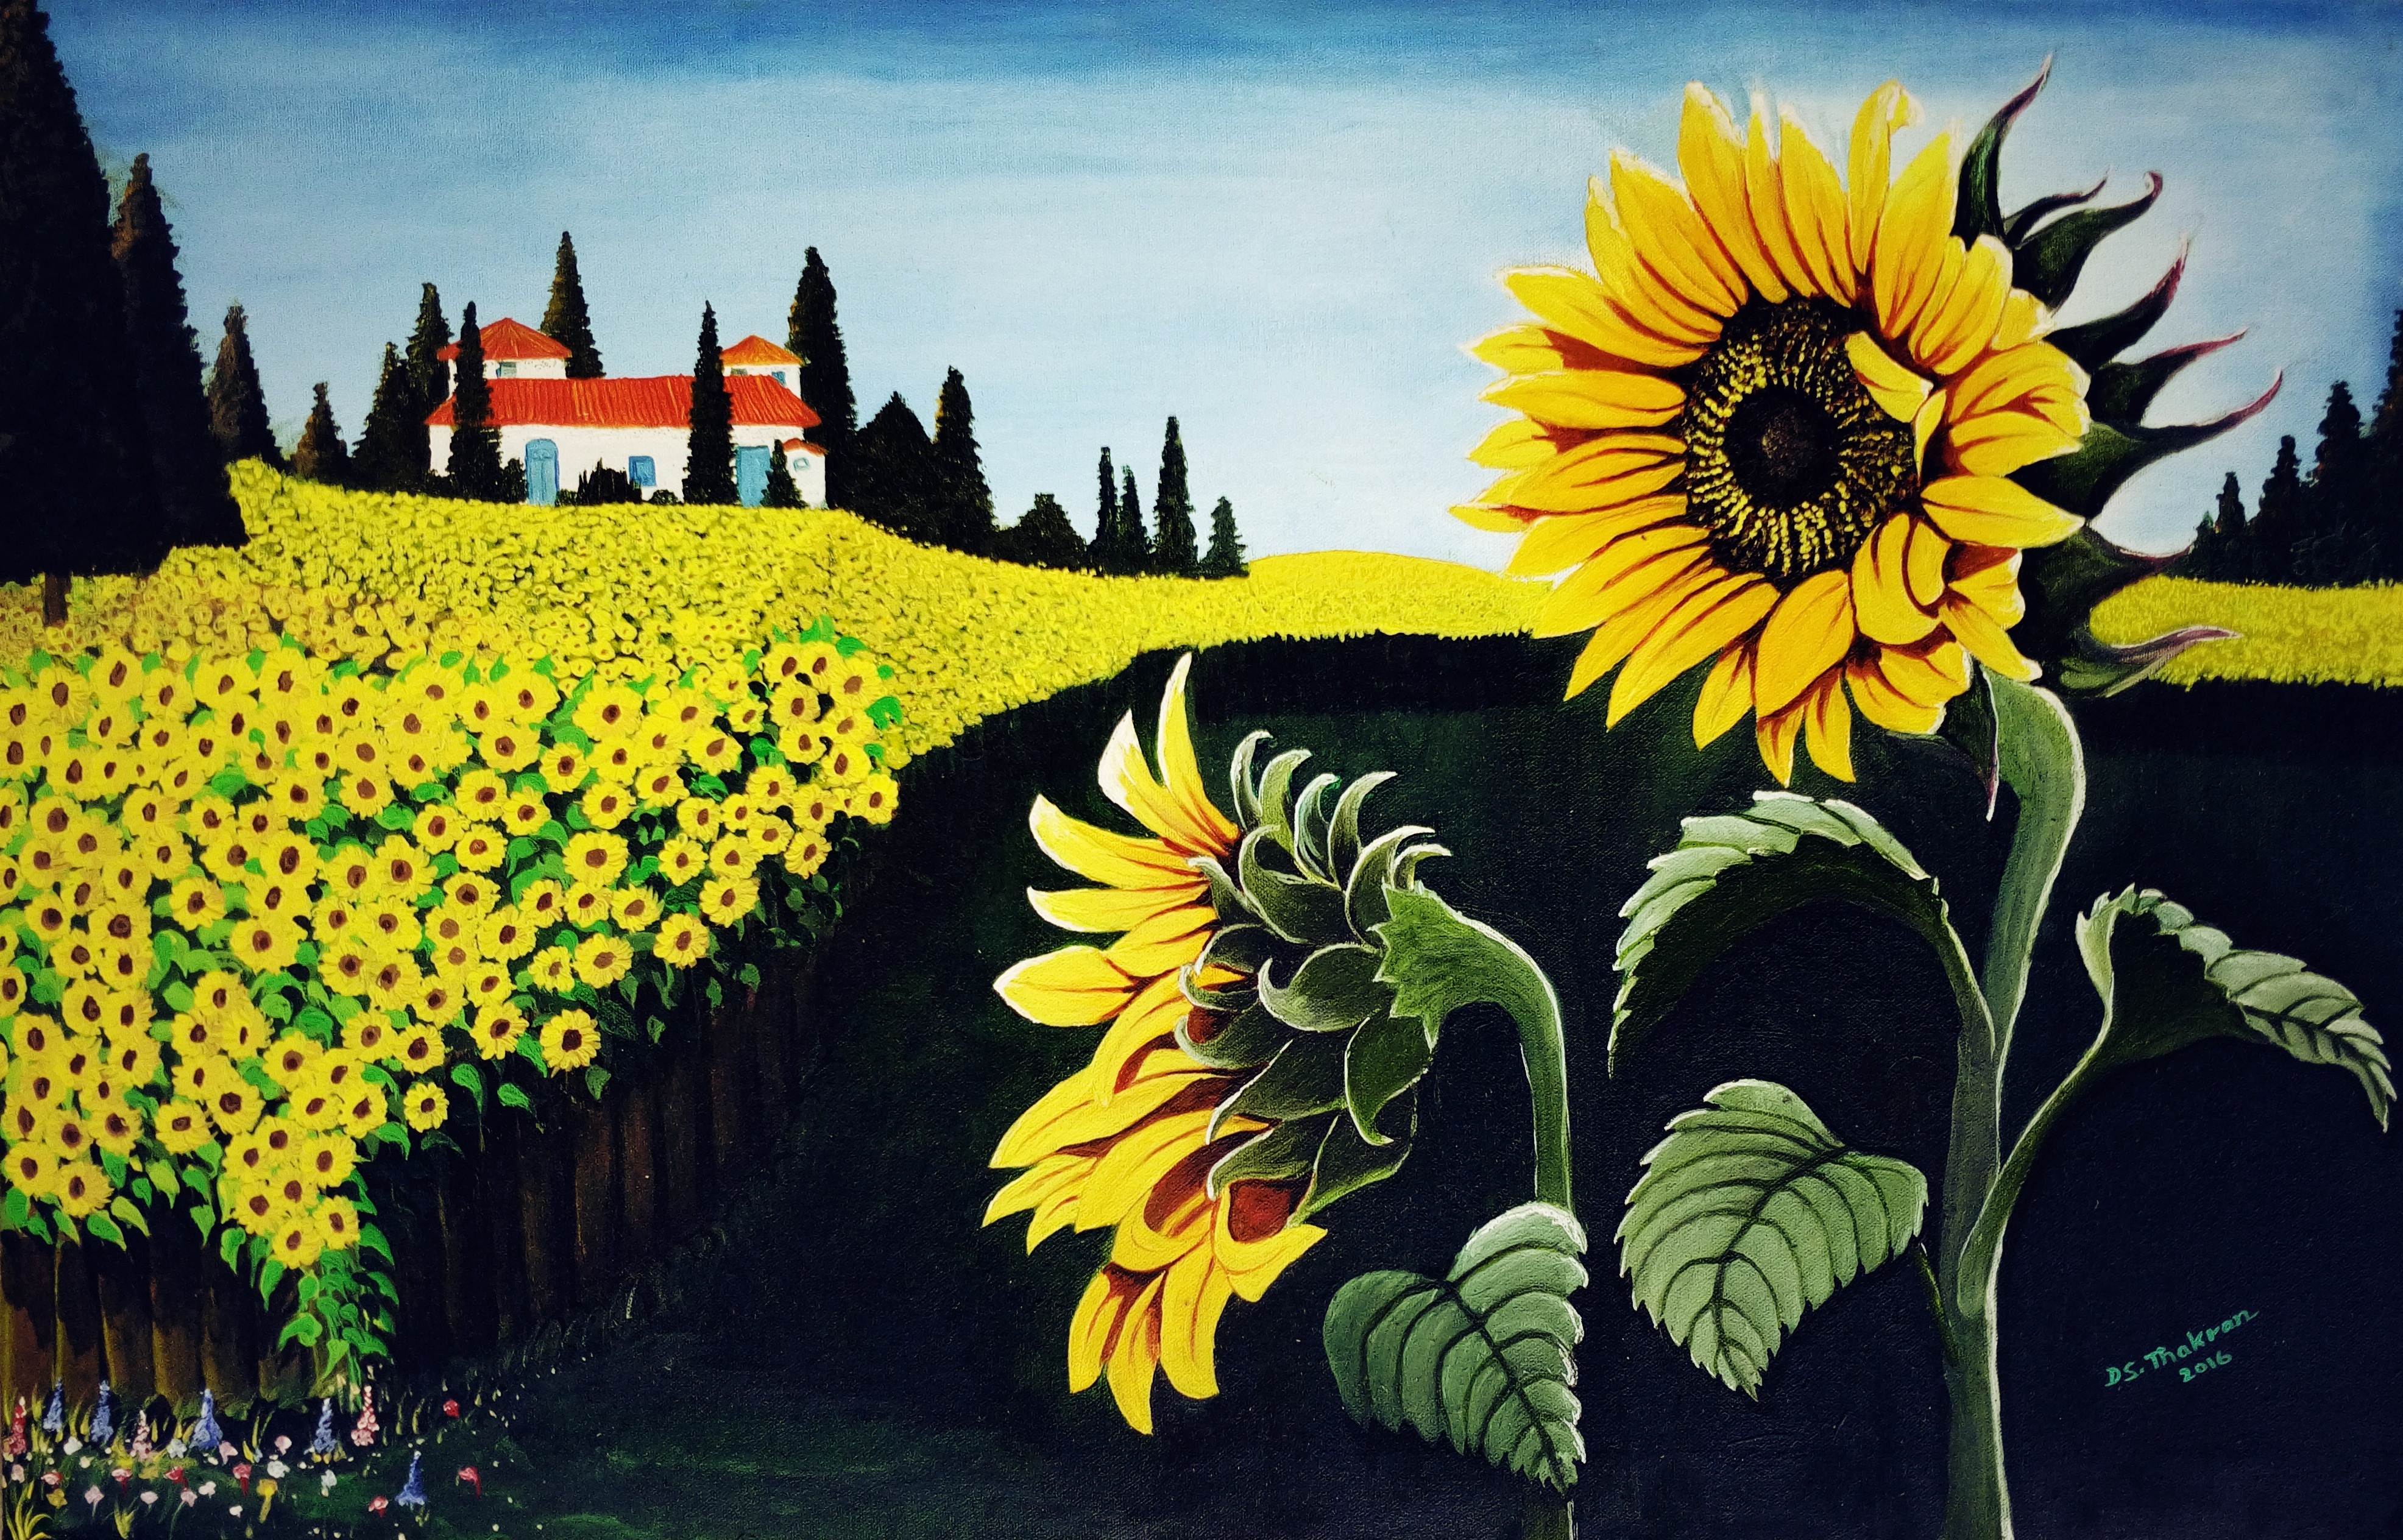 Buy Painting Sunflower Field 1 Artwork No 9542 by Indian Artist